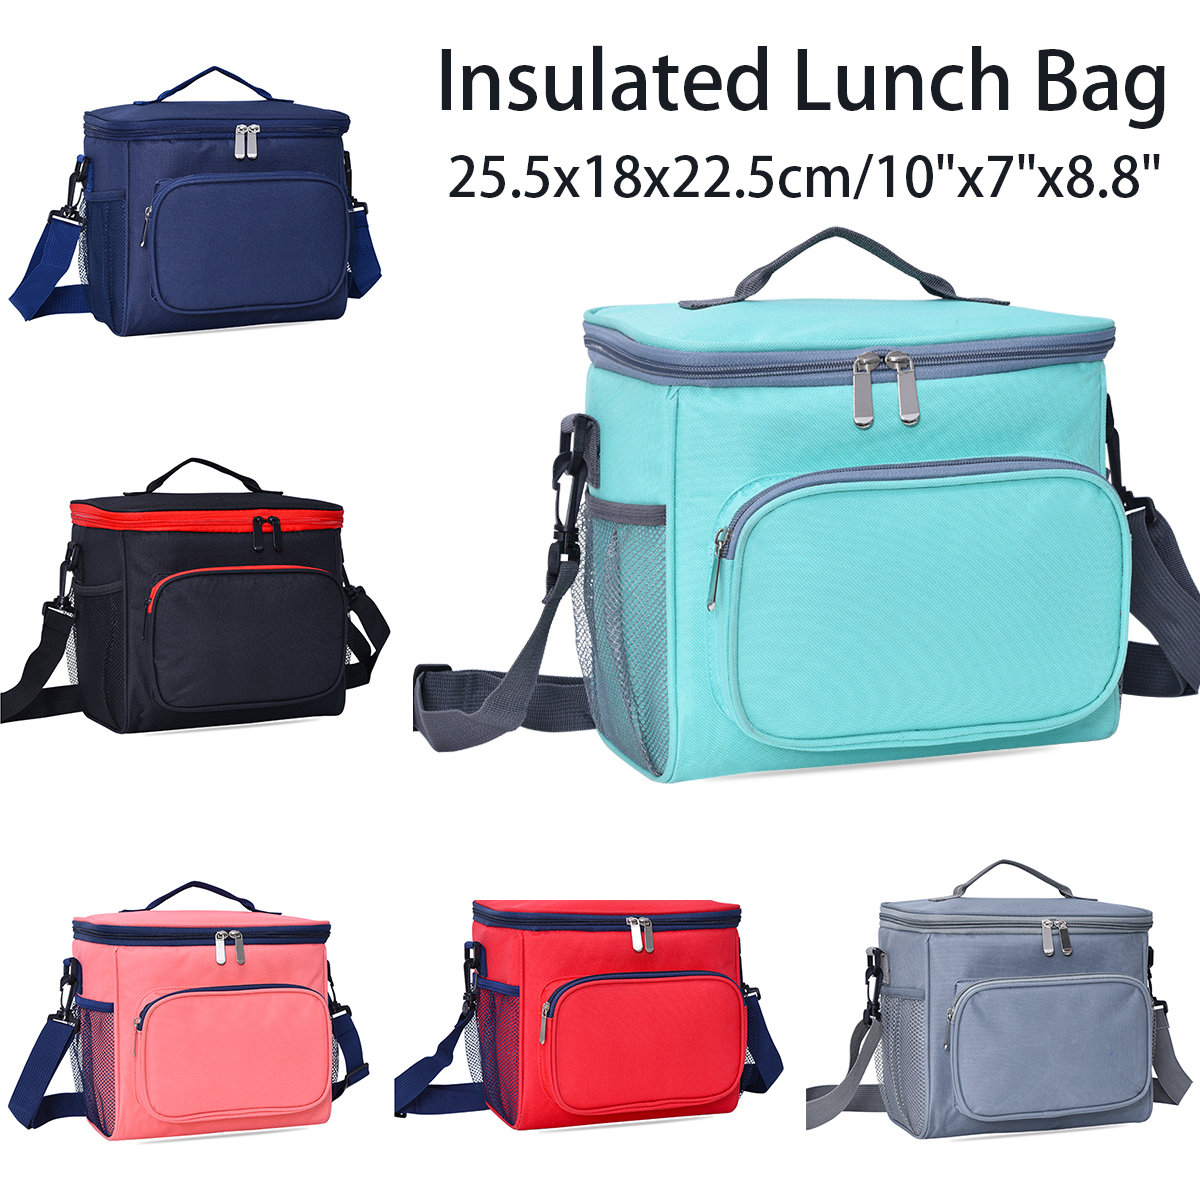 10L-Portable-Large-Capacity-with-Separate-Pocket-Oxford-Cloth-Insulated-Lunch-Bag-1853981-1